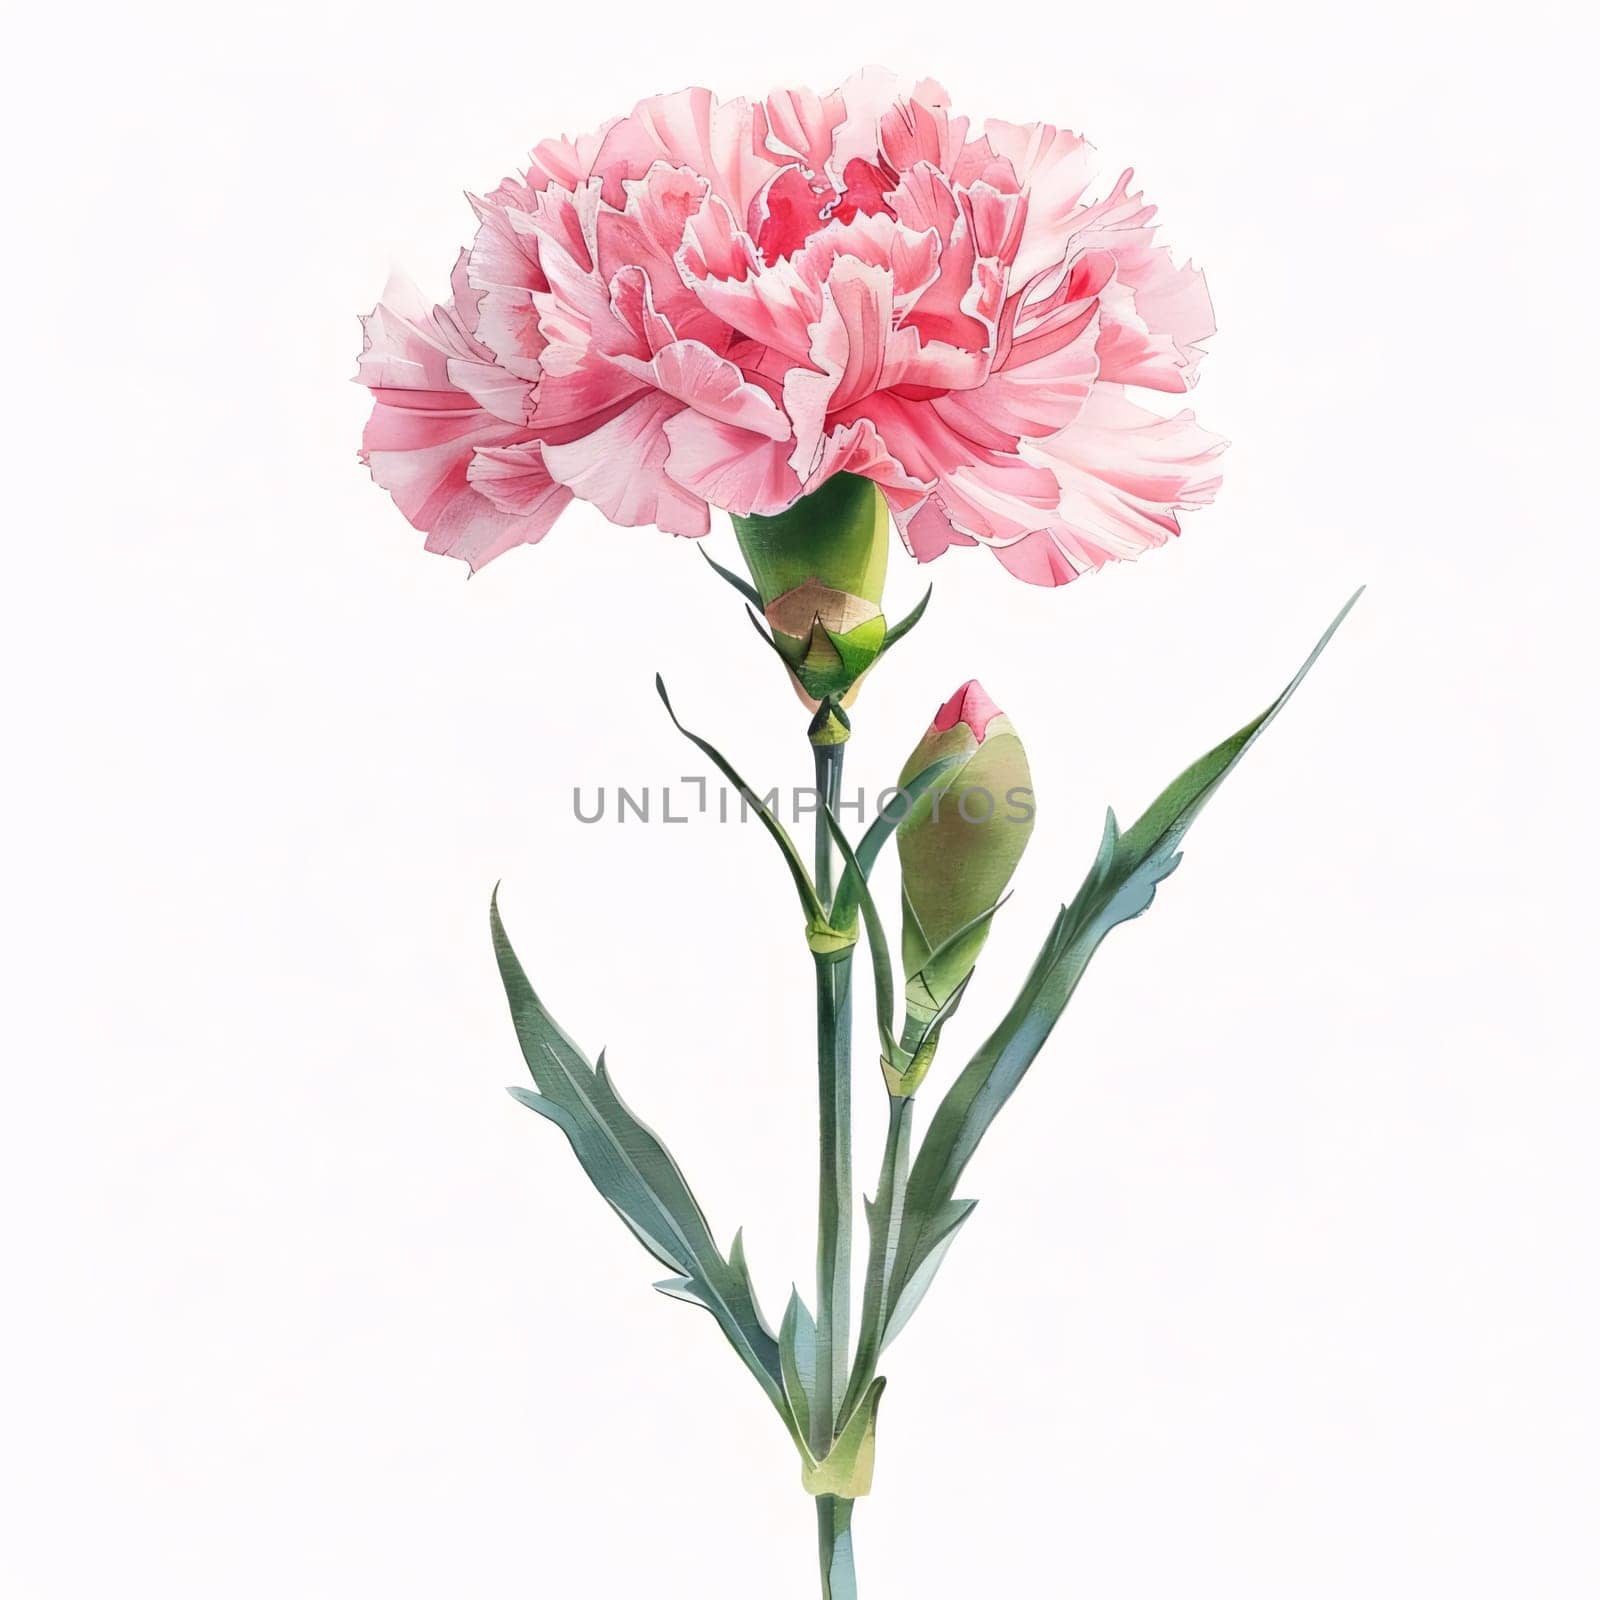 Drawn, painted pink carnation flowers on white background. Flowering flowers, a symbol of spring, new life. by ThemesS